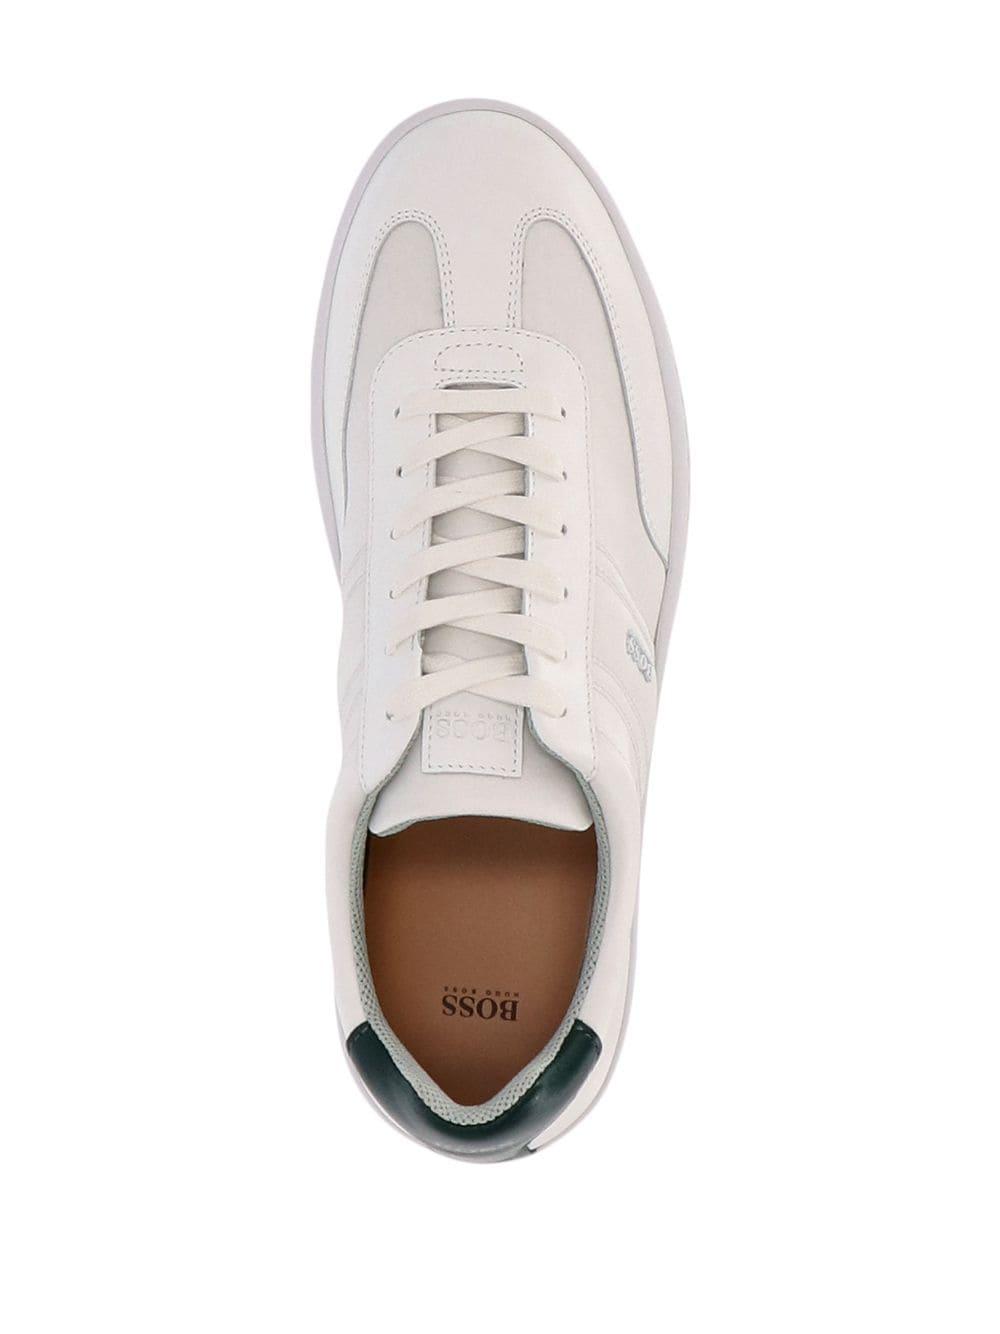 BOSS by HUGO BOSS Ribeira Tennis Trainers in White for Men | Lyst